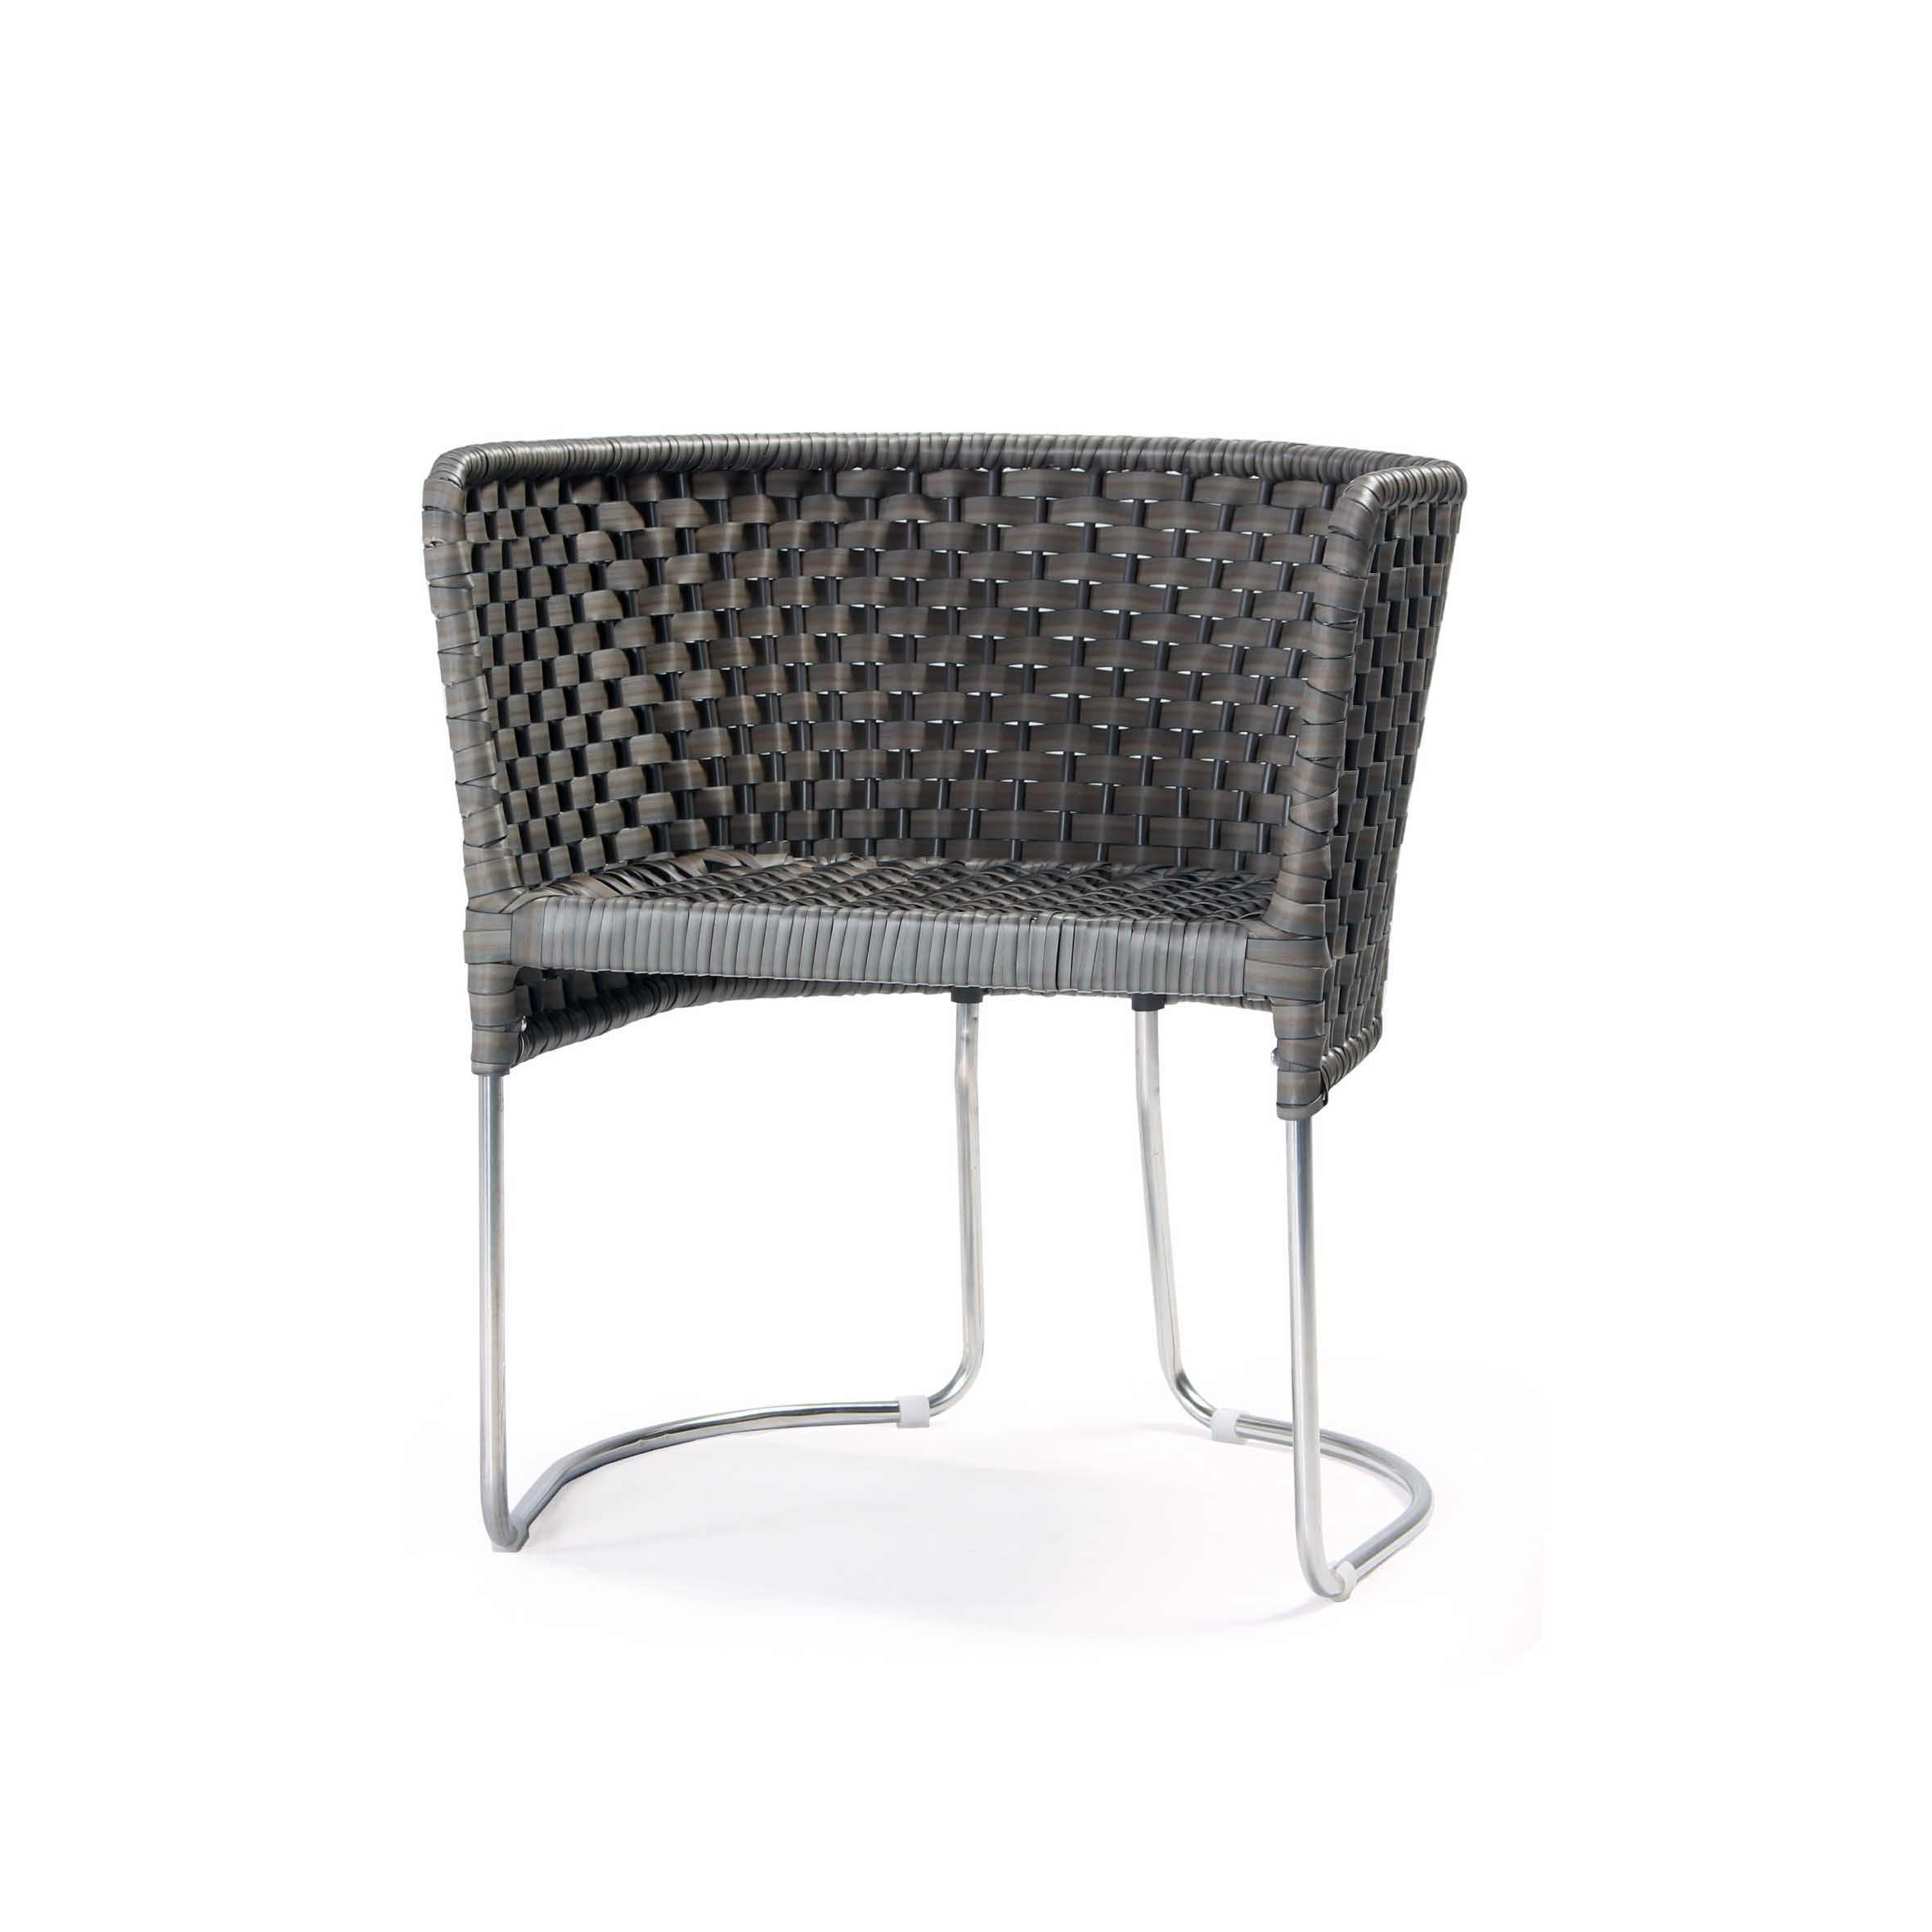 Best High quality Wicker Daybed Supplier –  Iris rattan leisure chair – TAILONG